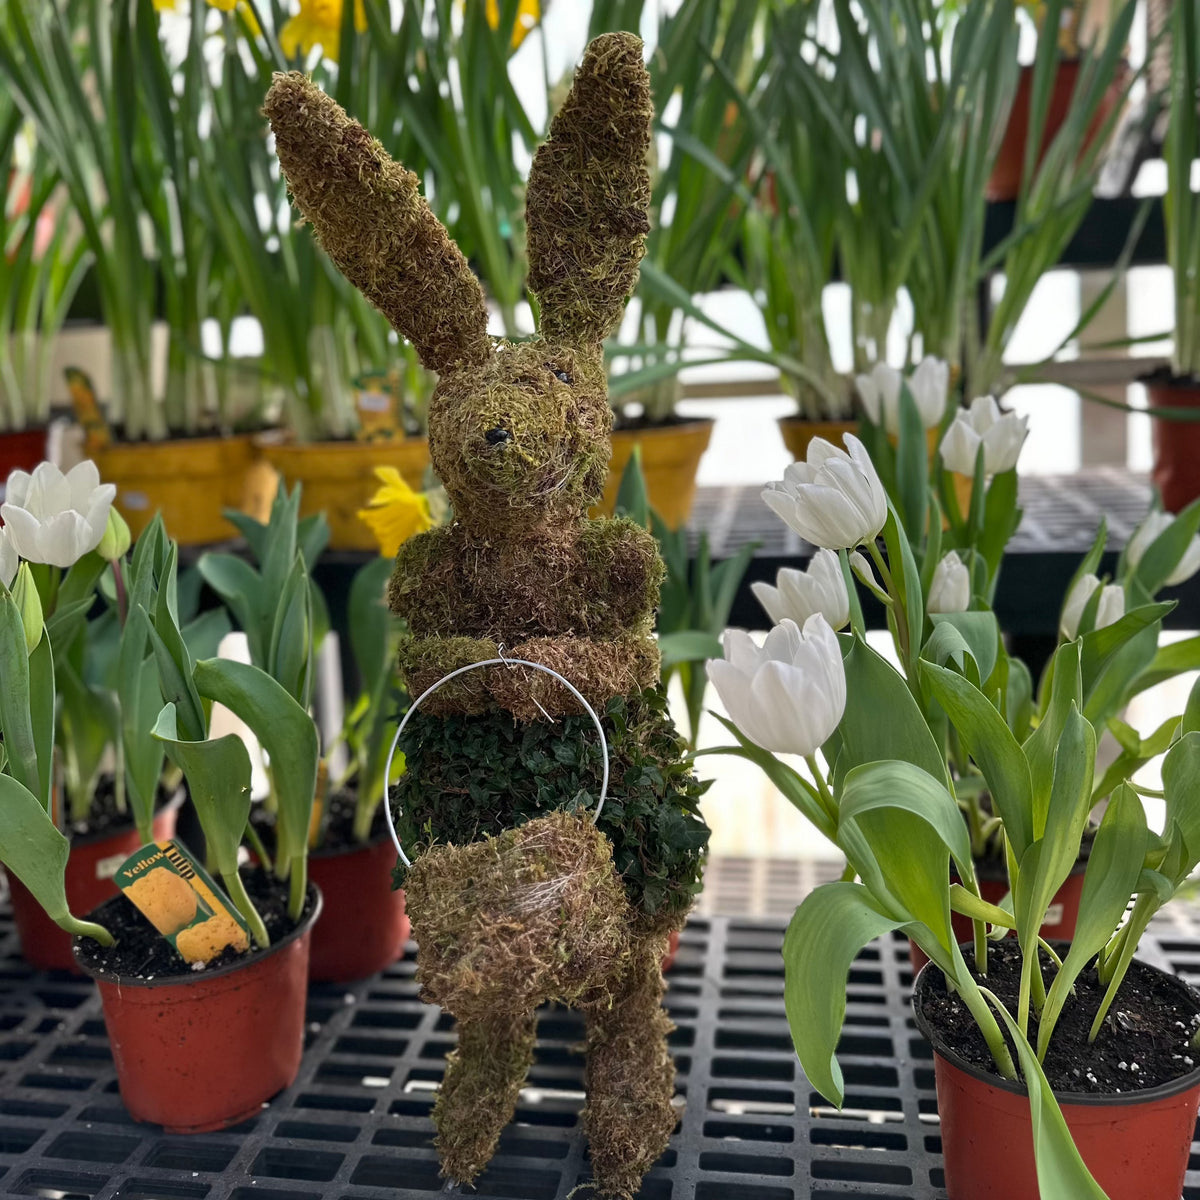 IVY GIRL BUNNY TOPIARY WITH BASKET